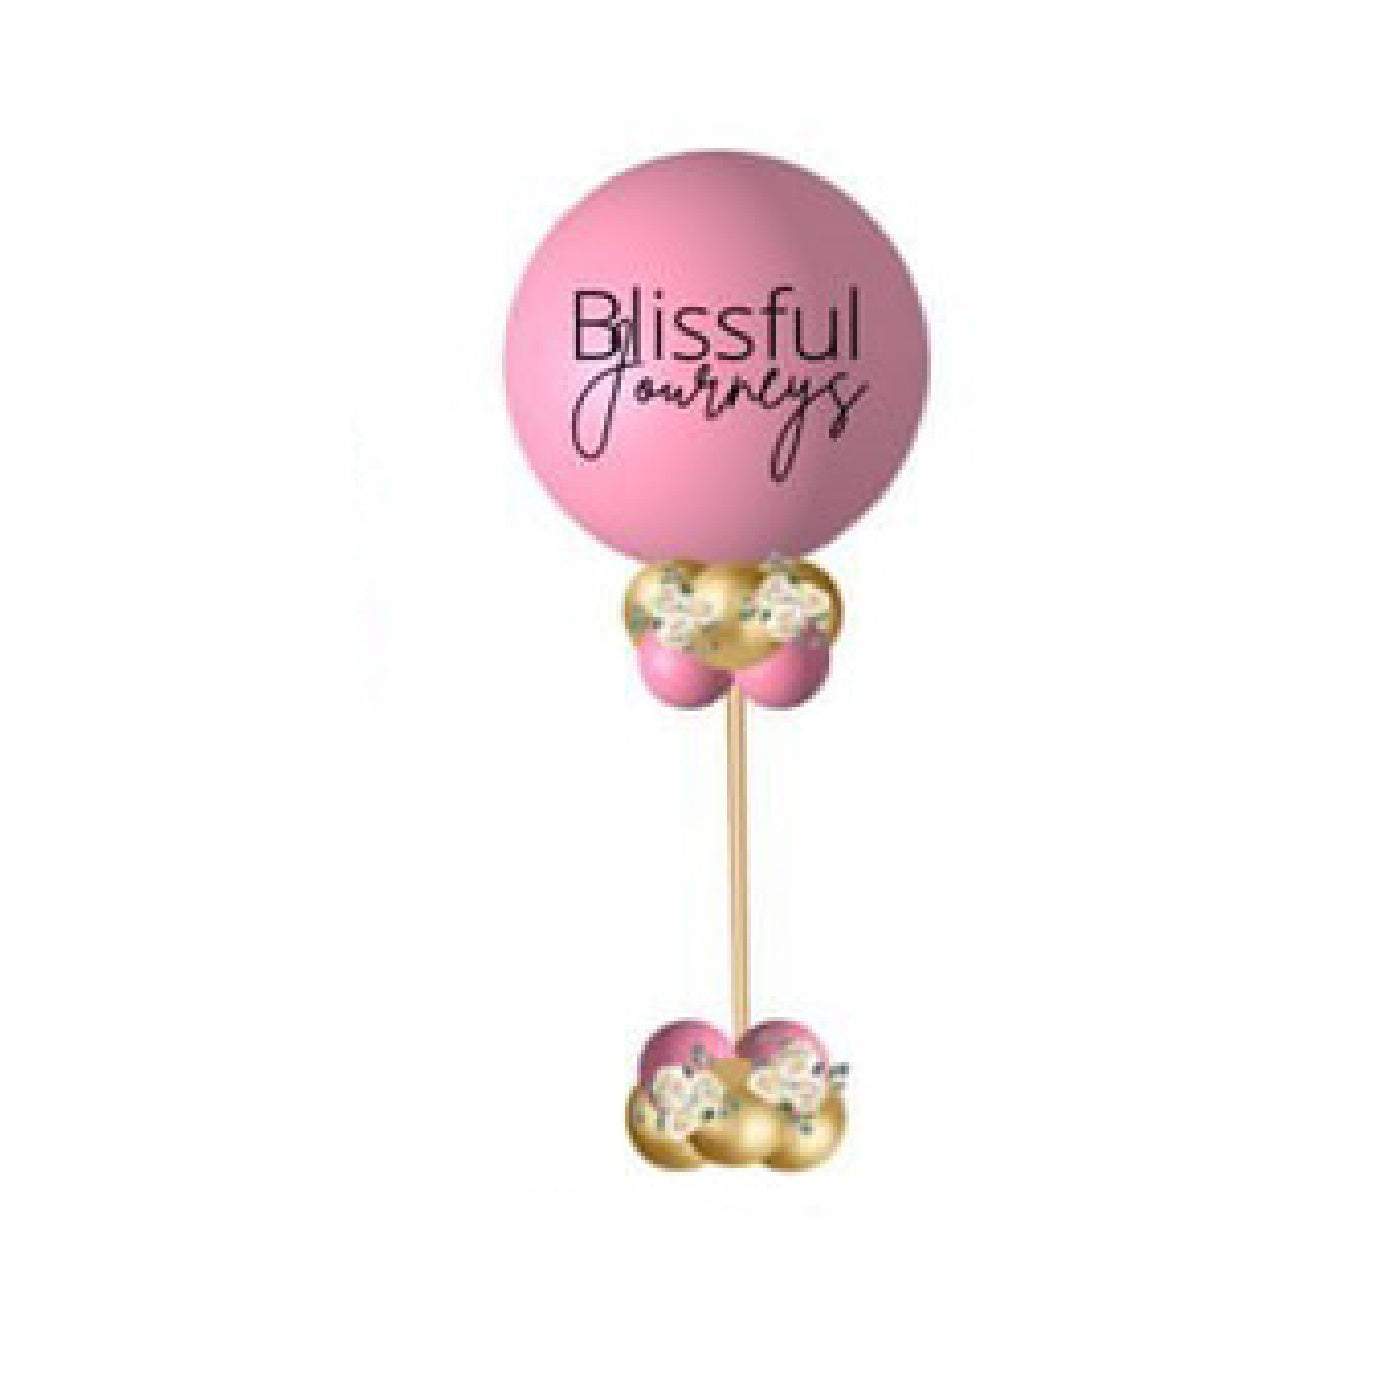 customize-a-bubble-balloon-banqute-for-your-next-wedding-birthday-party-balloon-decoration-blissful-journeys